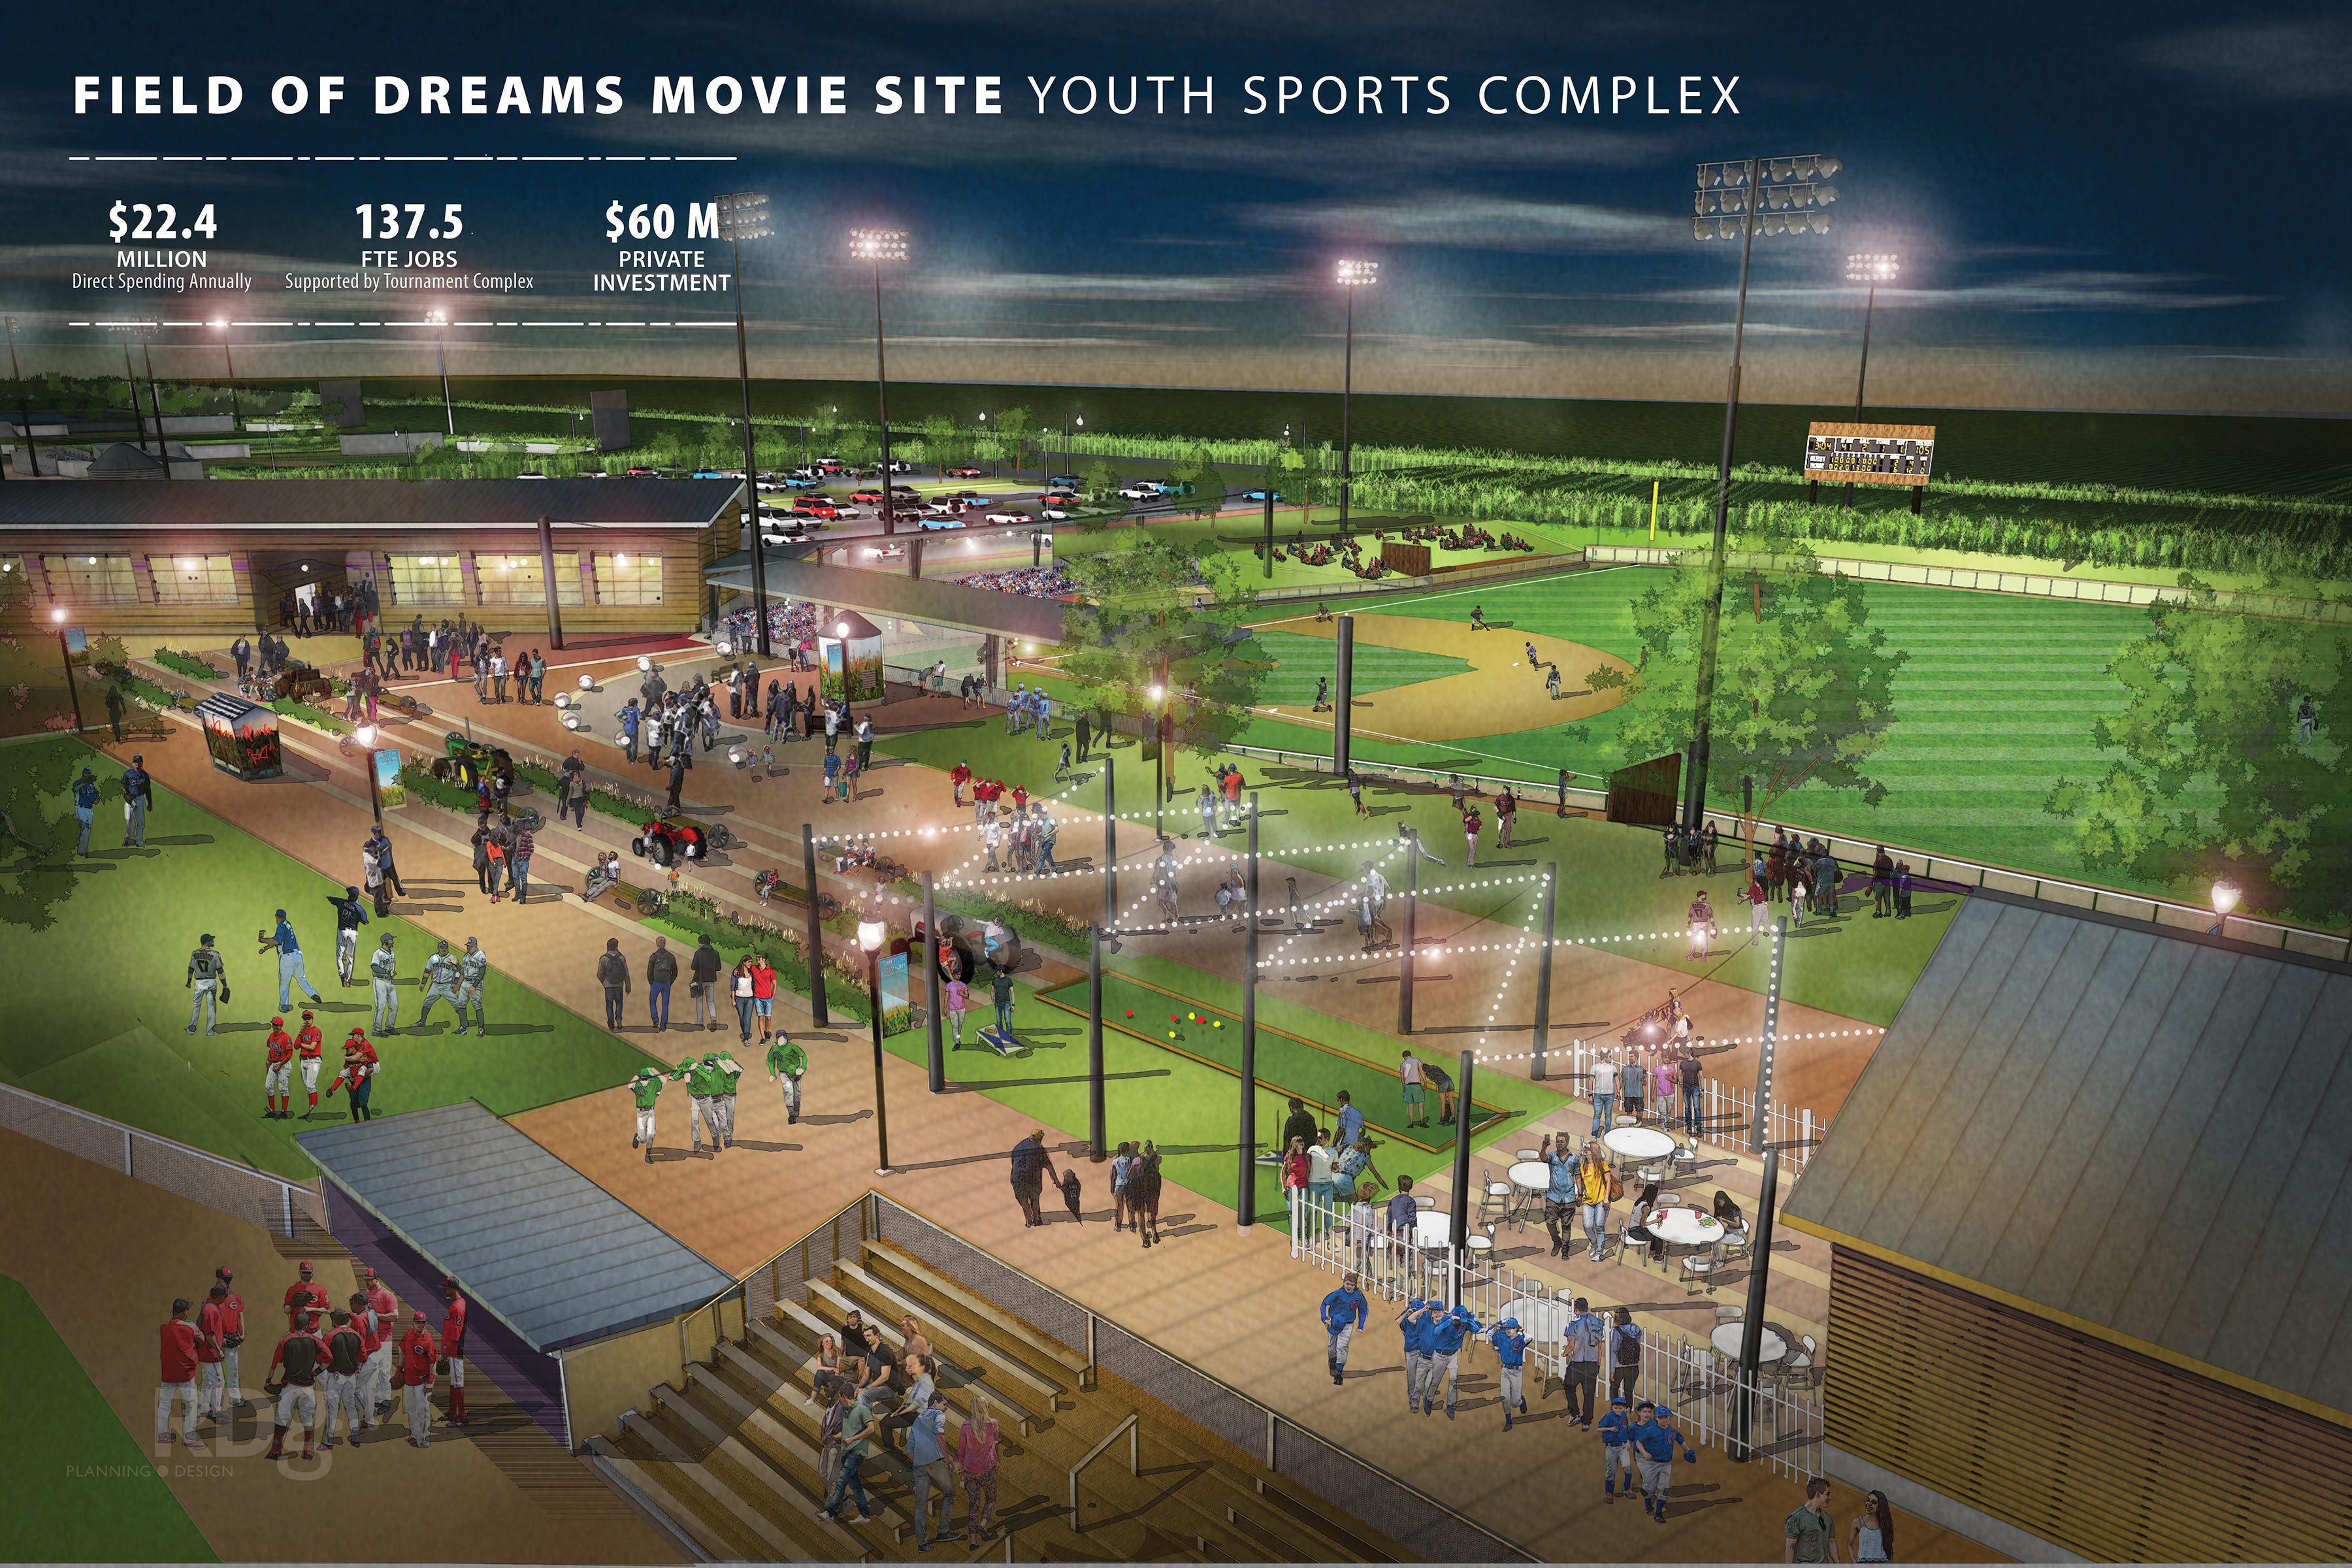 Field of Dreams owners hope to 'keep it authentic' despite changes